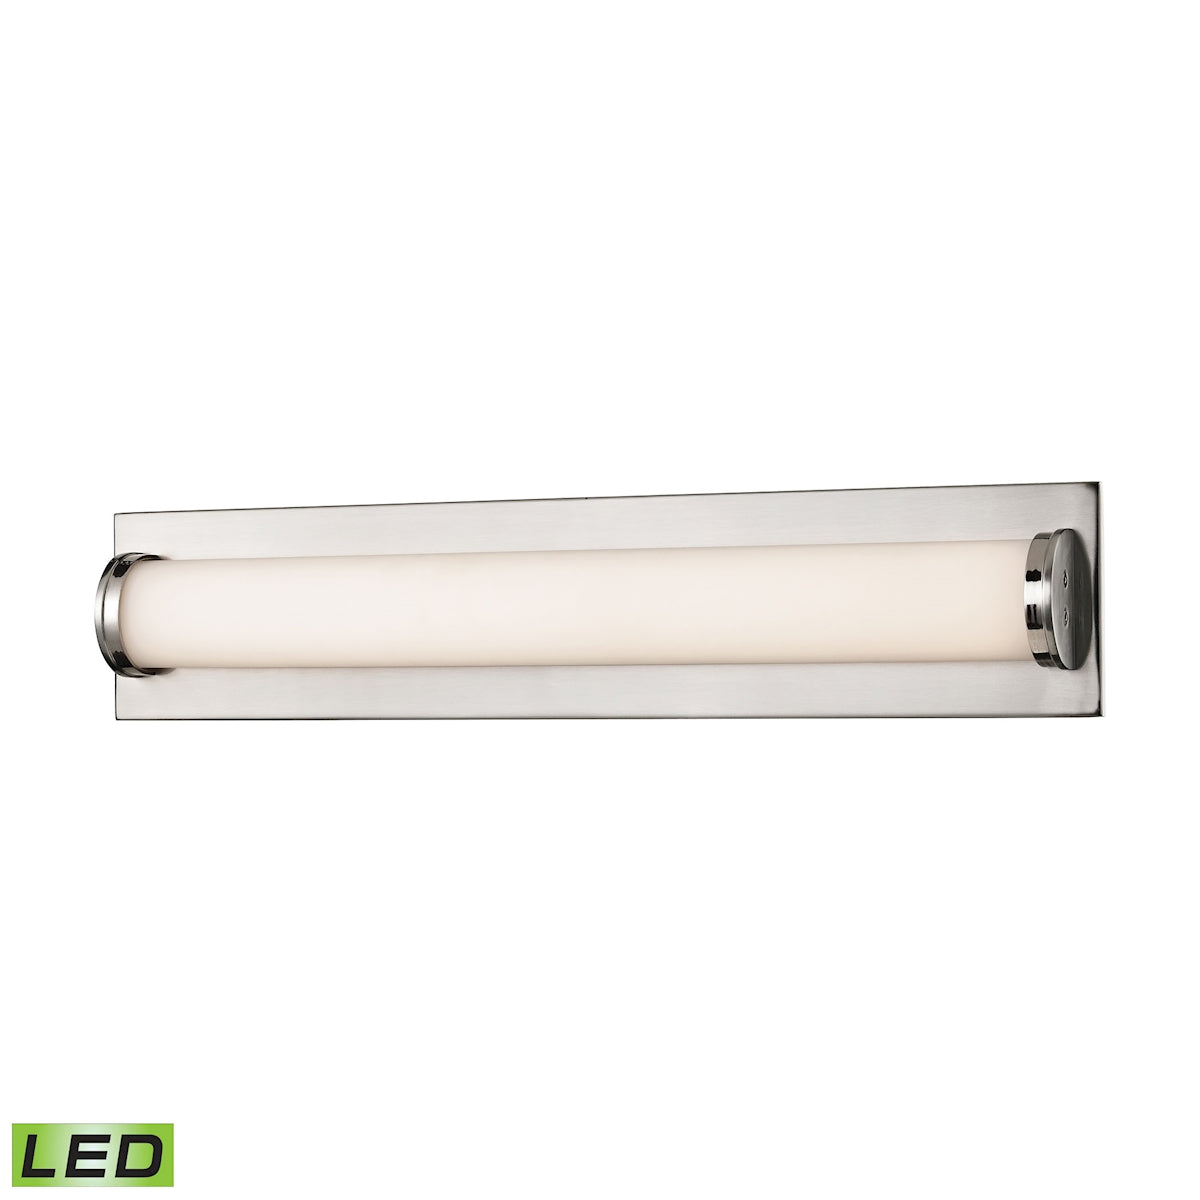 ELK Lighting BVL371-10-16M Barrie 1-Light Vanity Sconce in Matte Satin Nickel with Opal White Glass Diffuser - Integrated LED